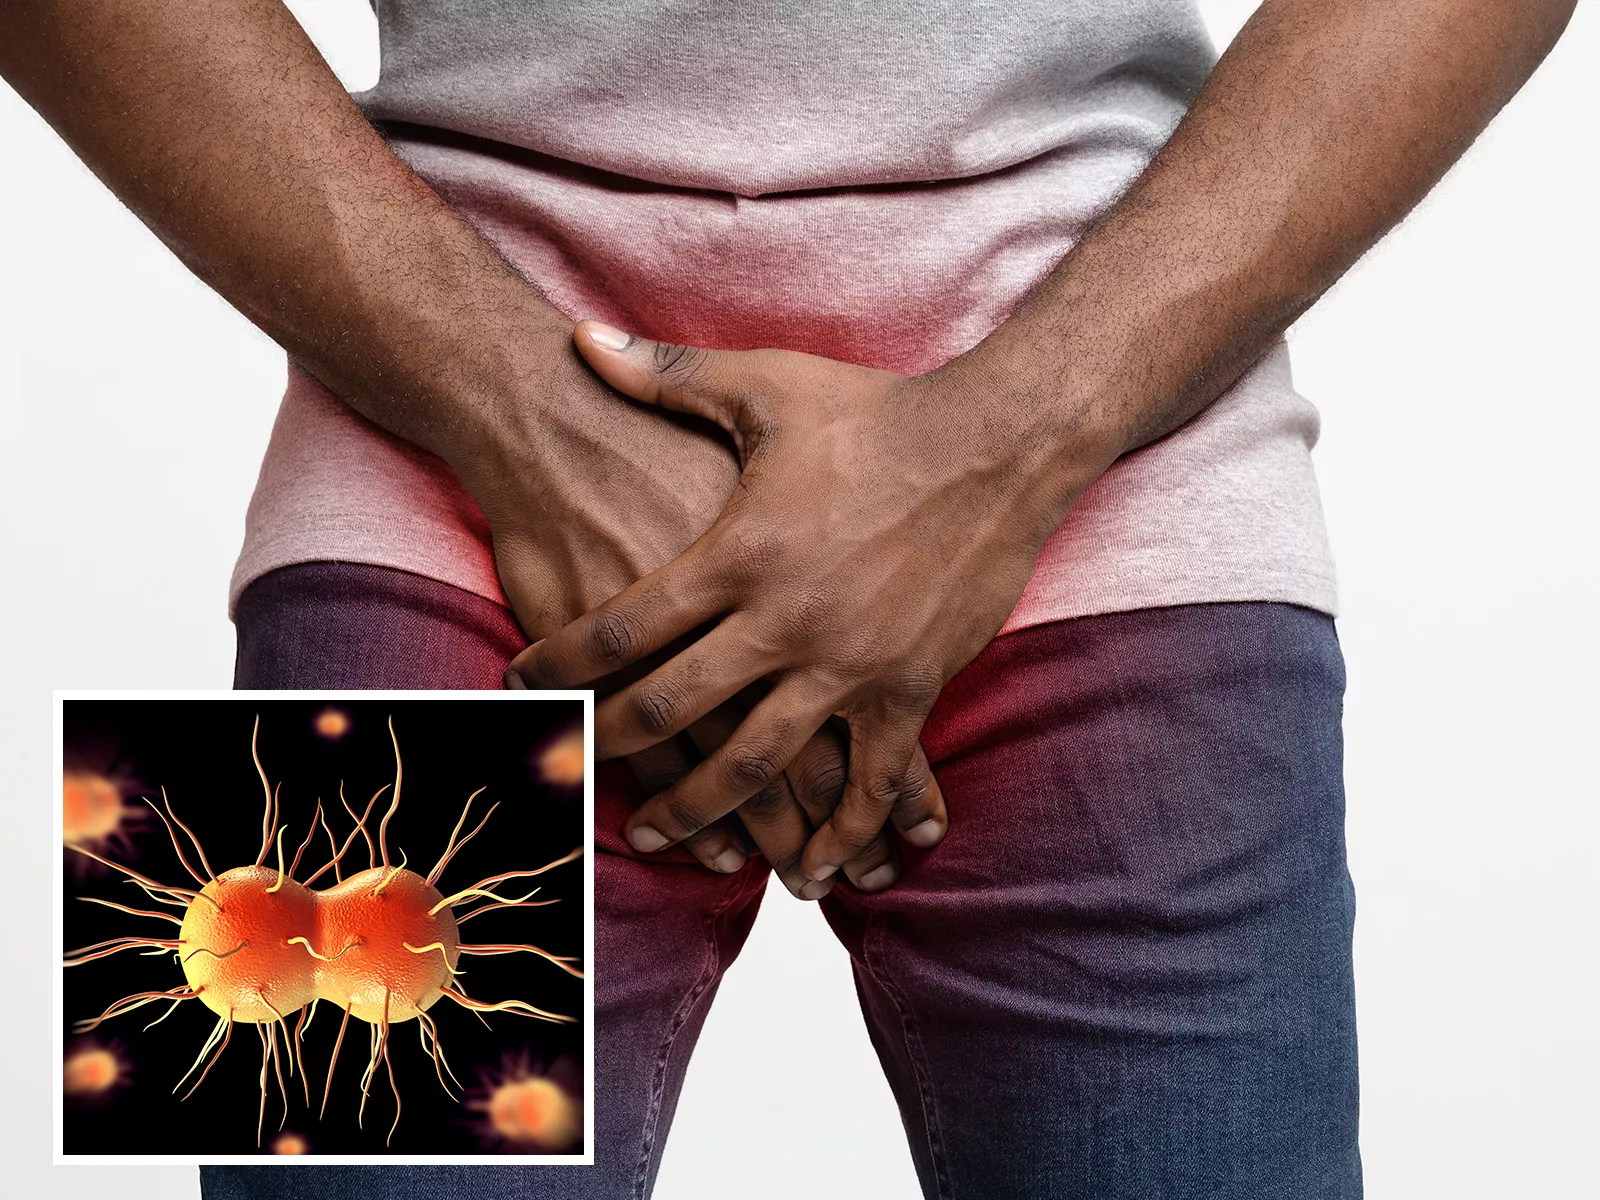 Man Gets Extreme, Super-Gonorrhea after Unprotected Sex with Prostitute